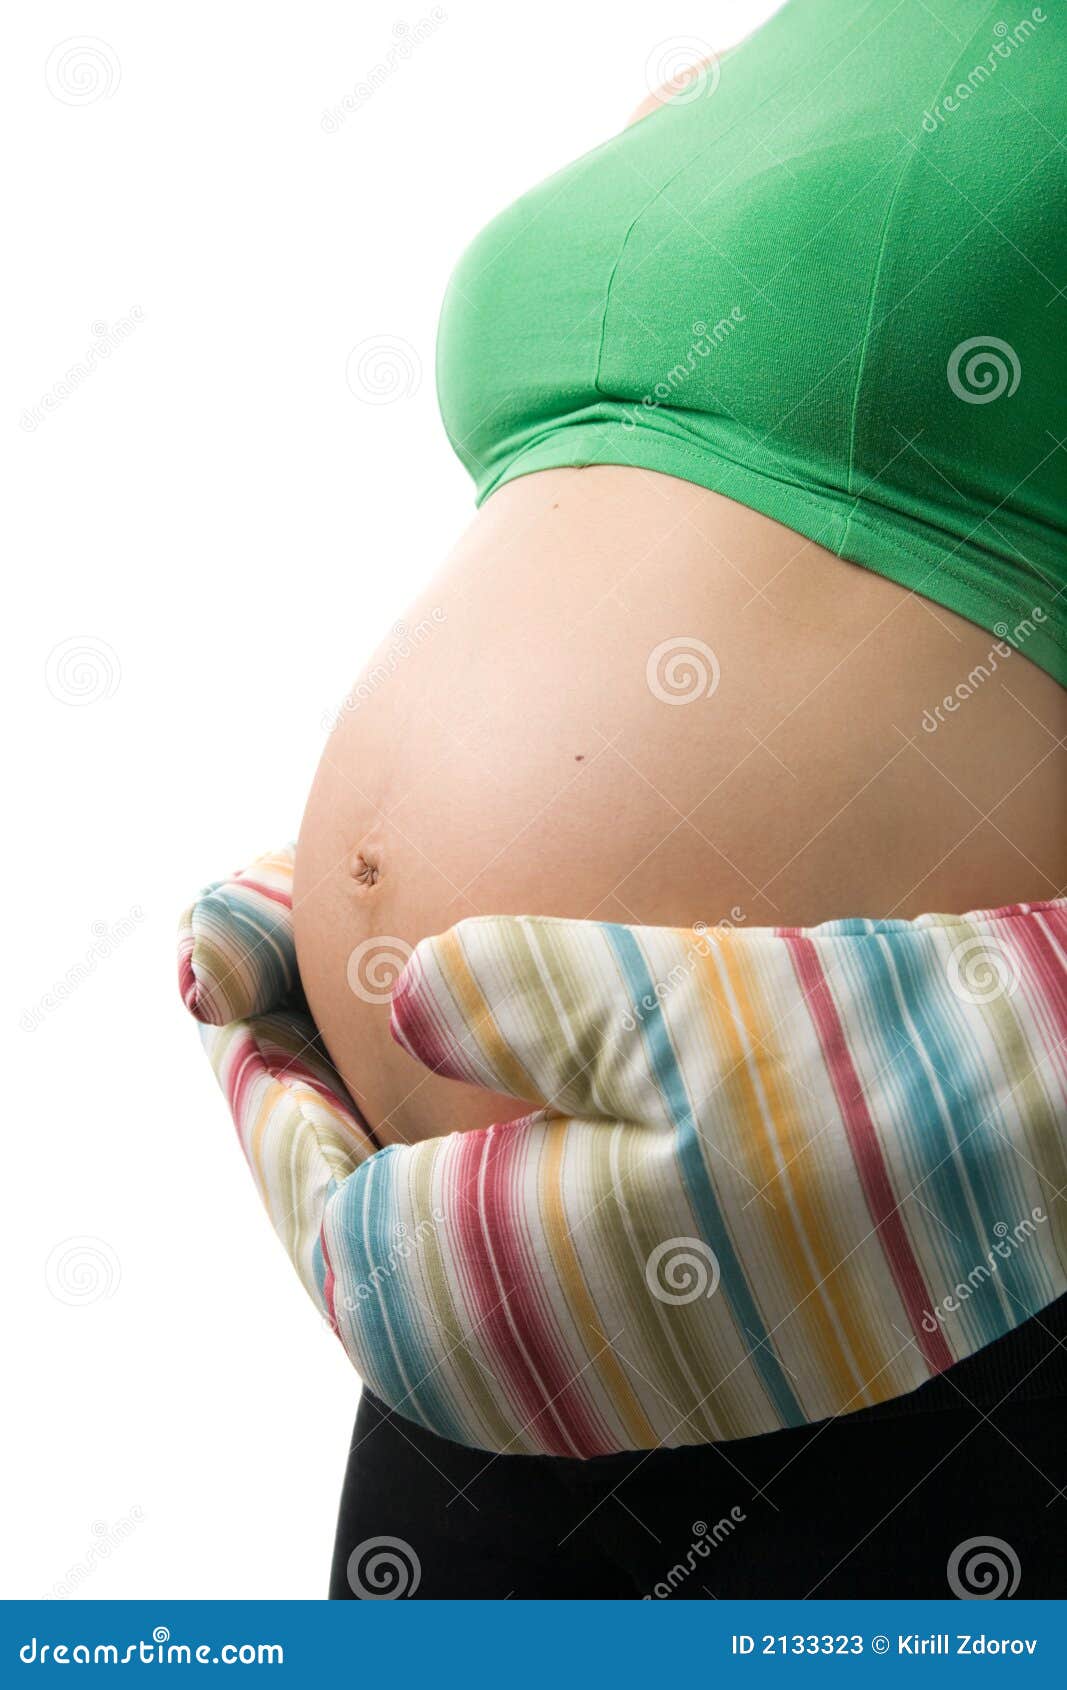 Pregnant Stomach With Mitts Stock Image - Image of female, baby: 2133323